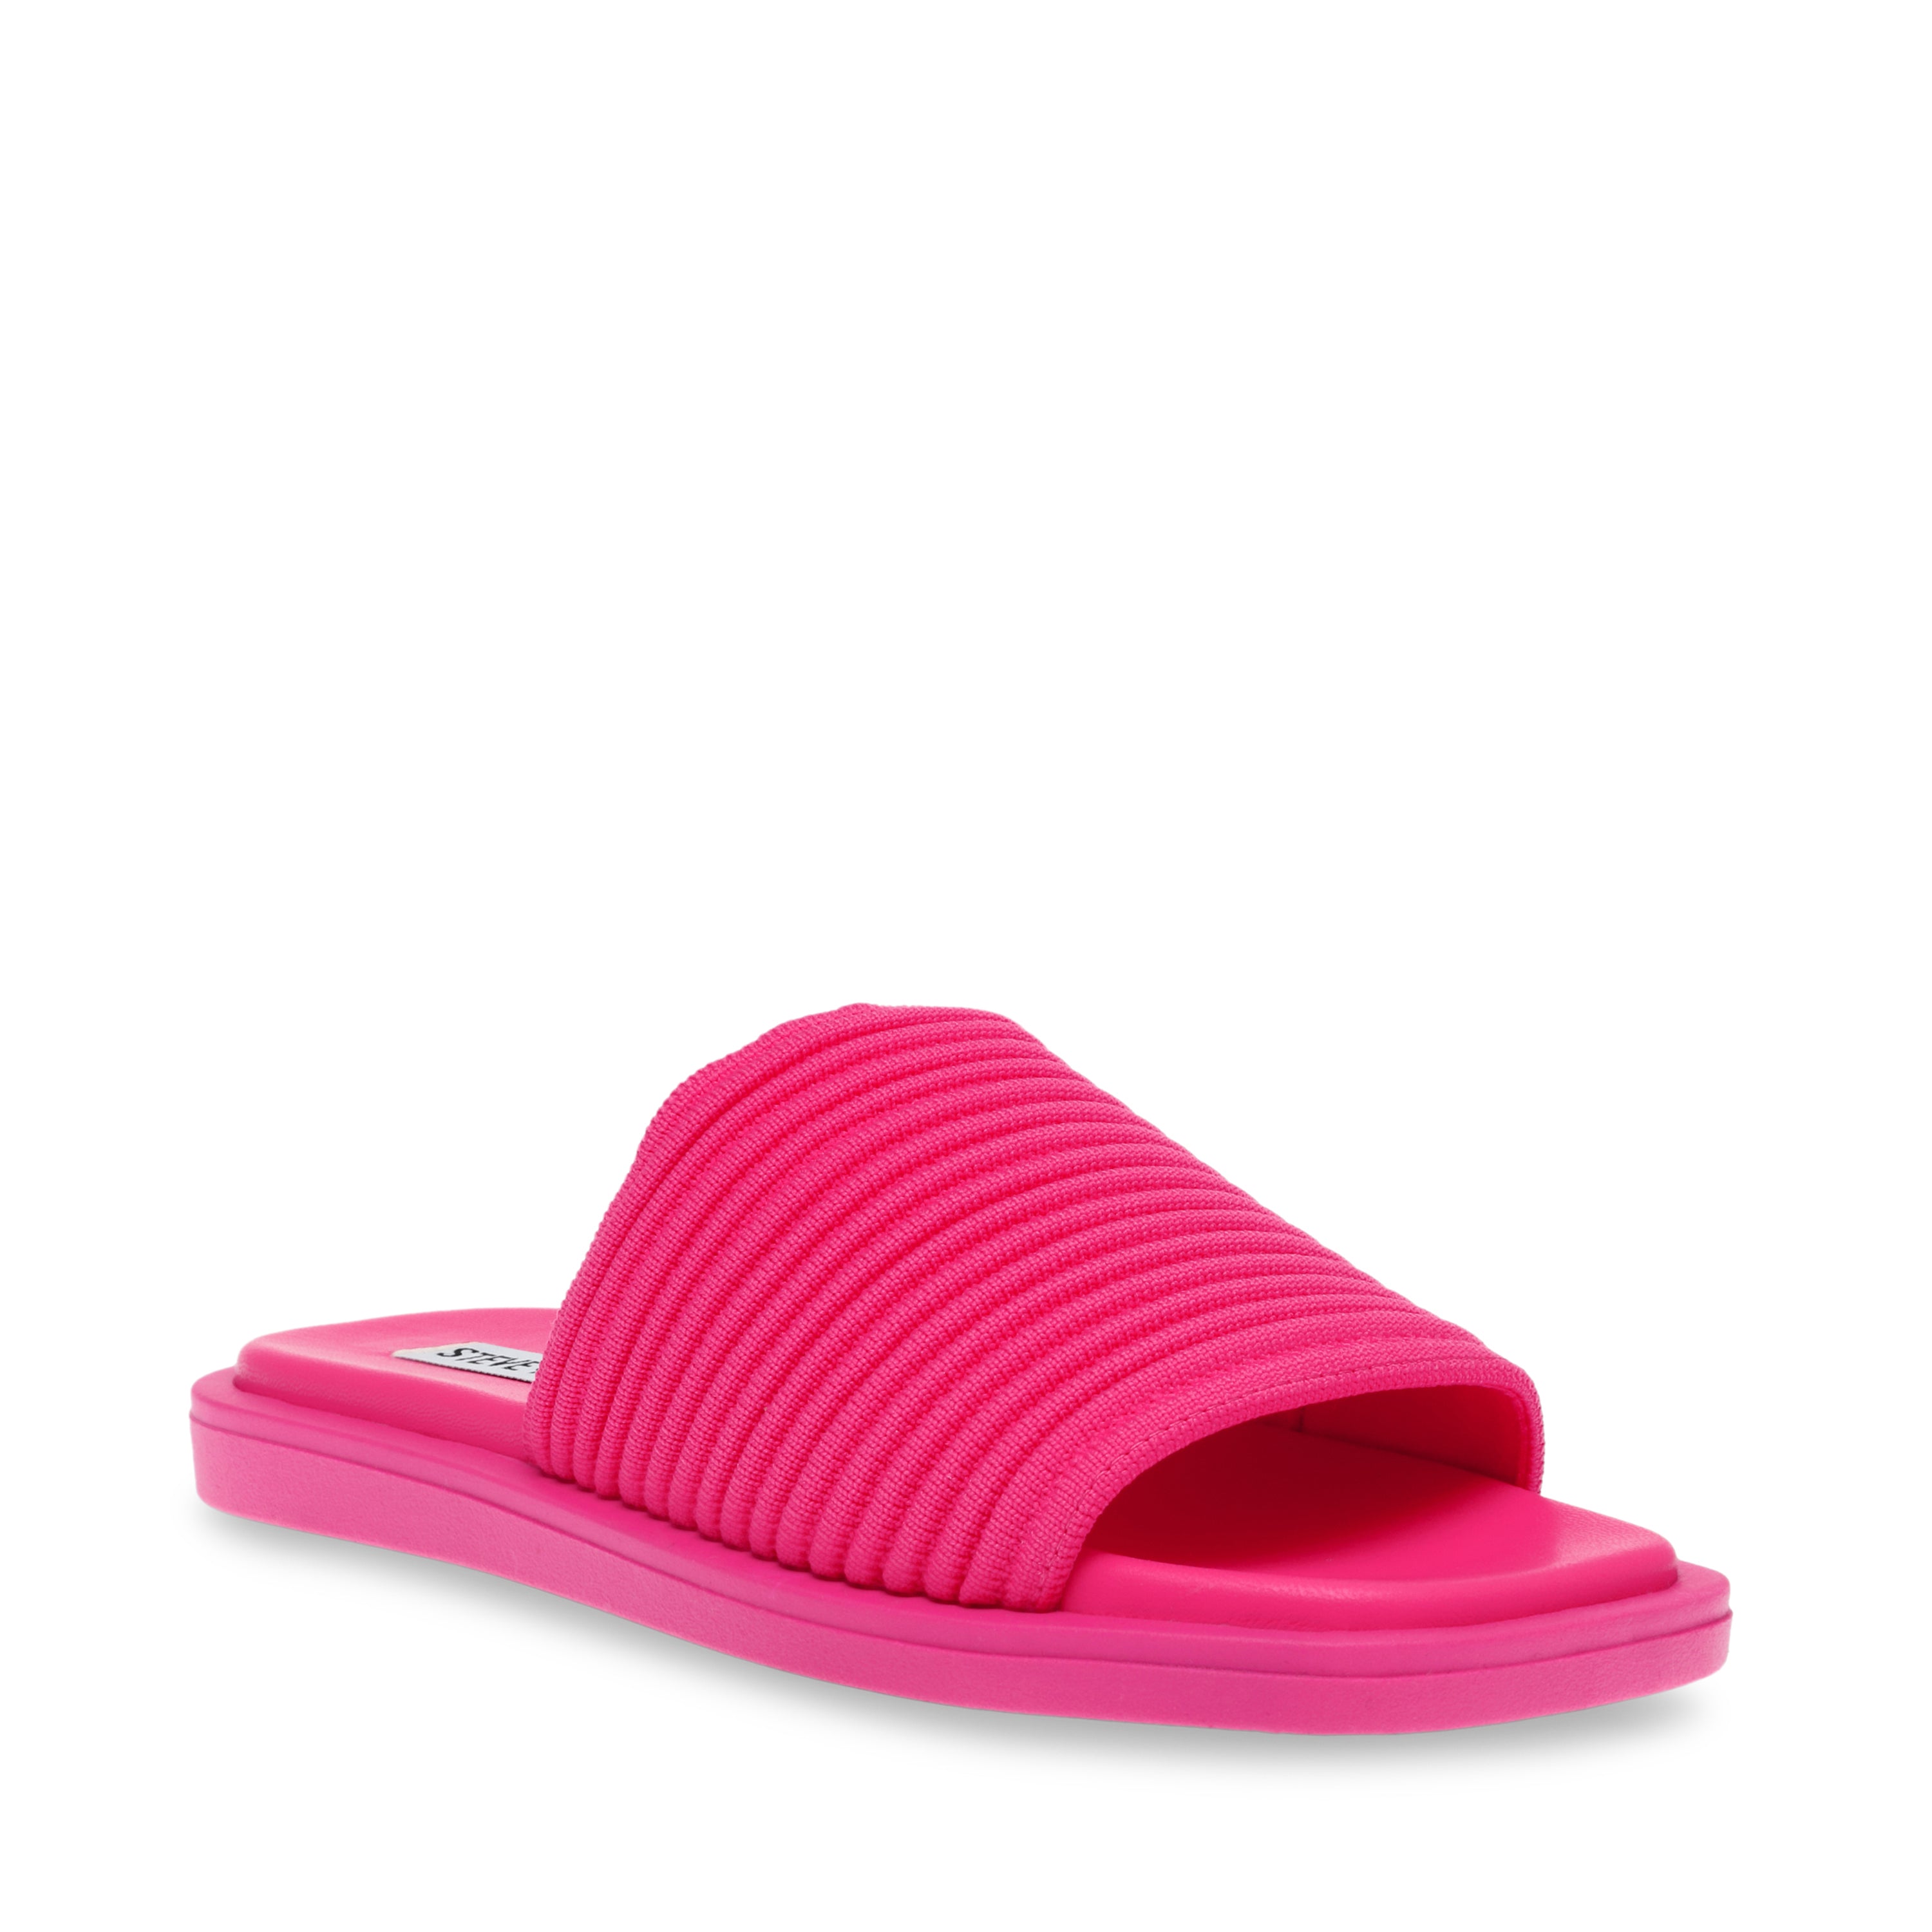 AWESTRUCK FUCHSIA SANDALS- Hover Image